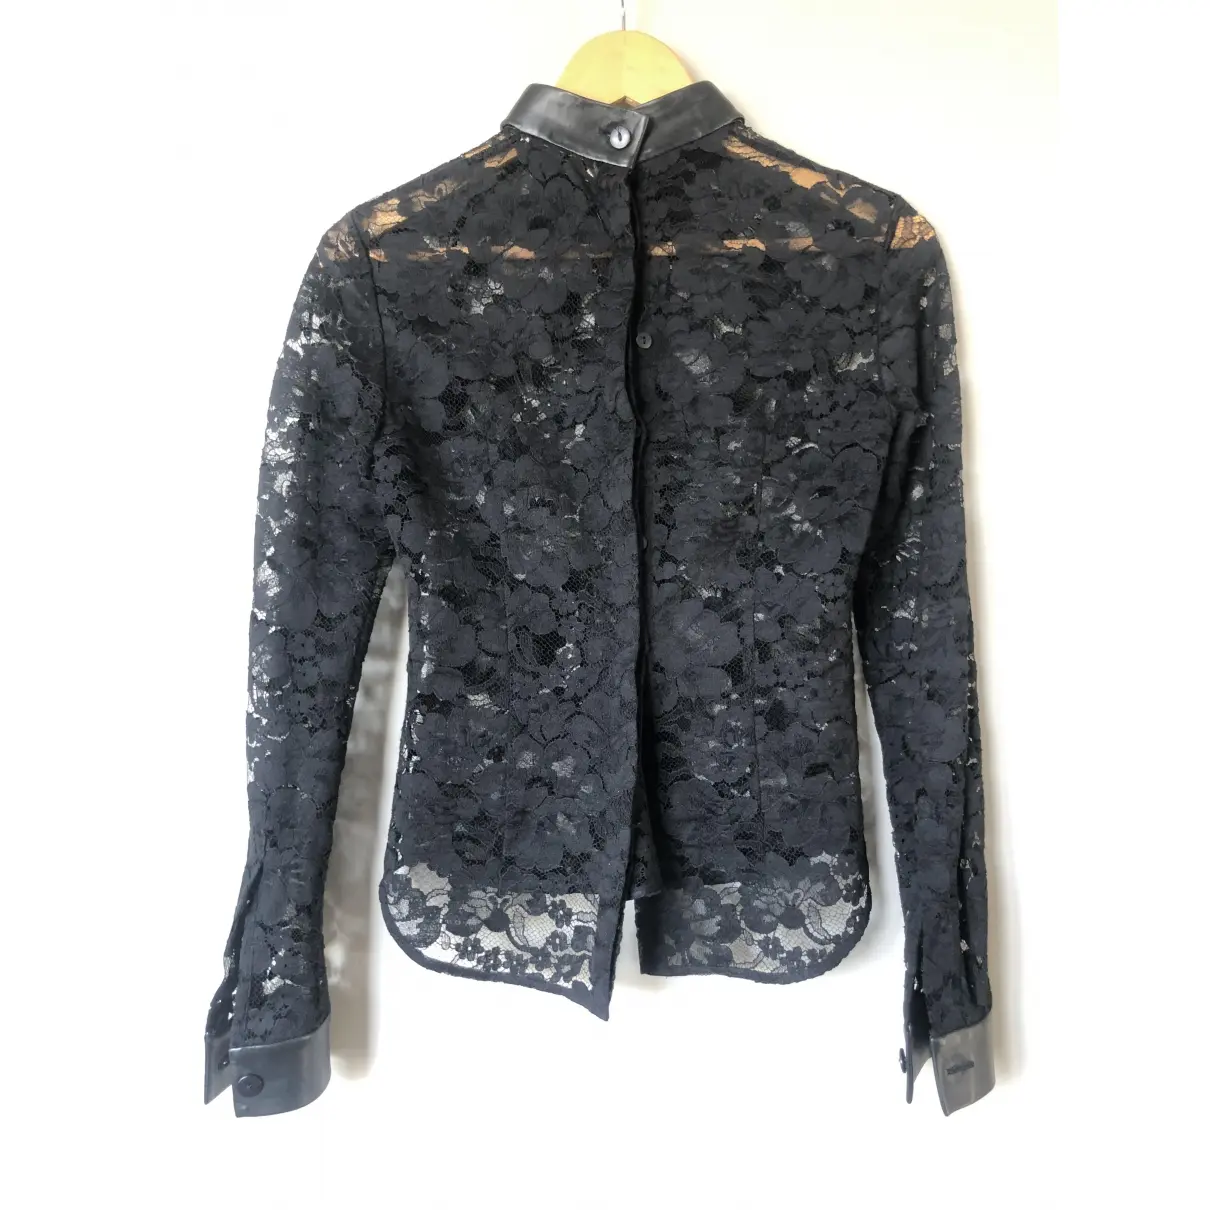 Christopher Kane Lace blouse for sale